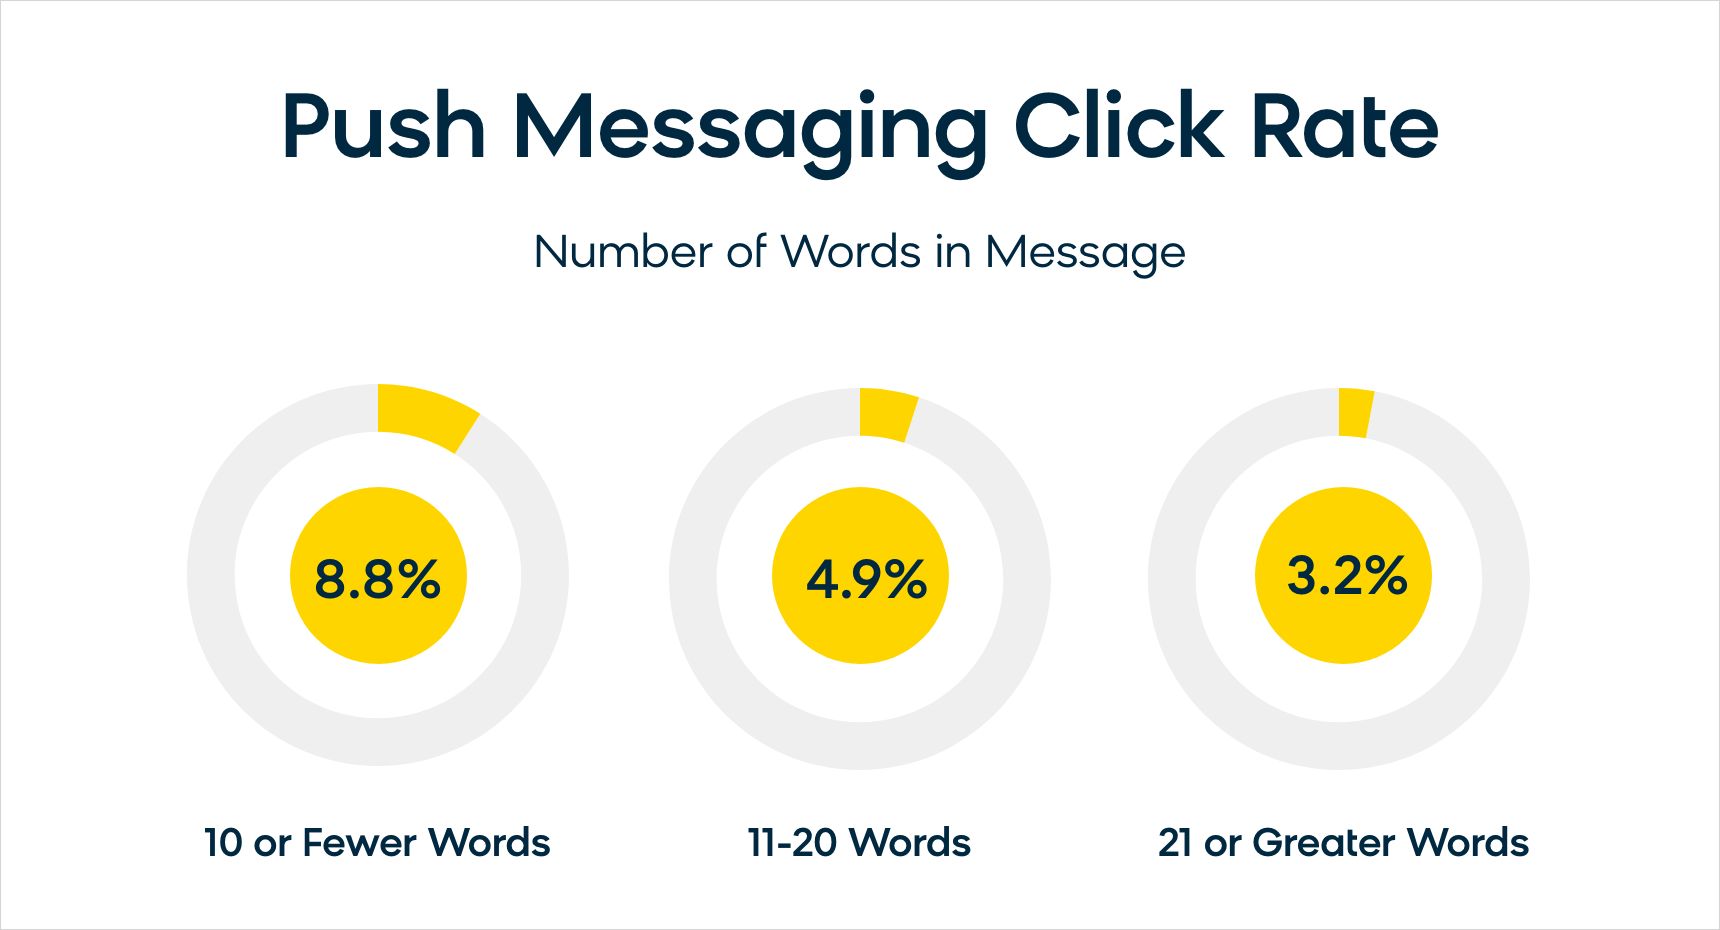 The push messaging click rate varies depending on the number of words used in a message